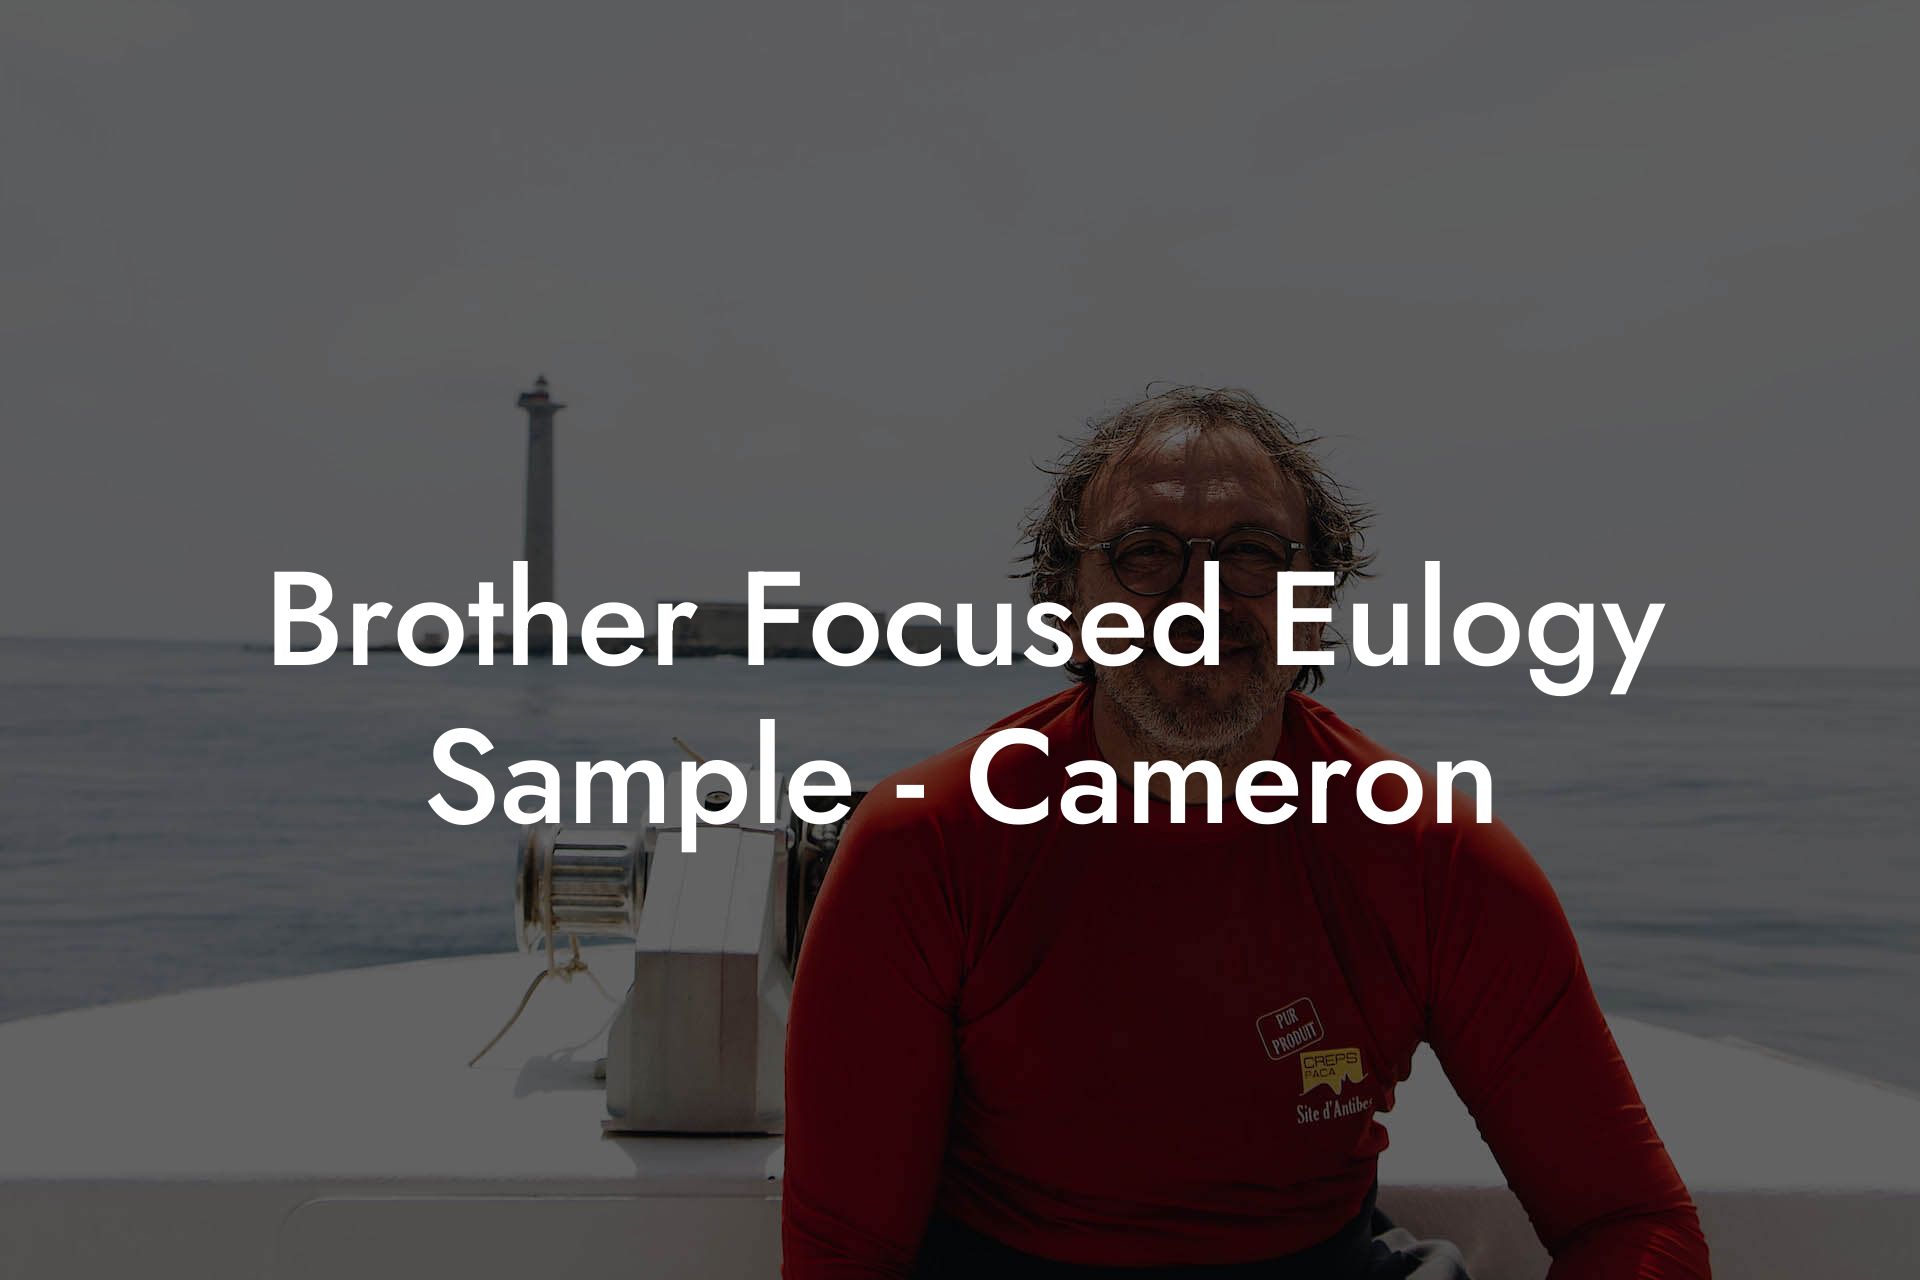 Brother Focused Eulogy Sample - Cameron